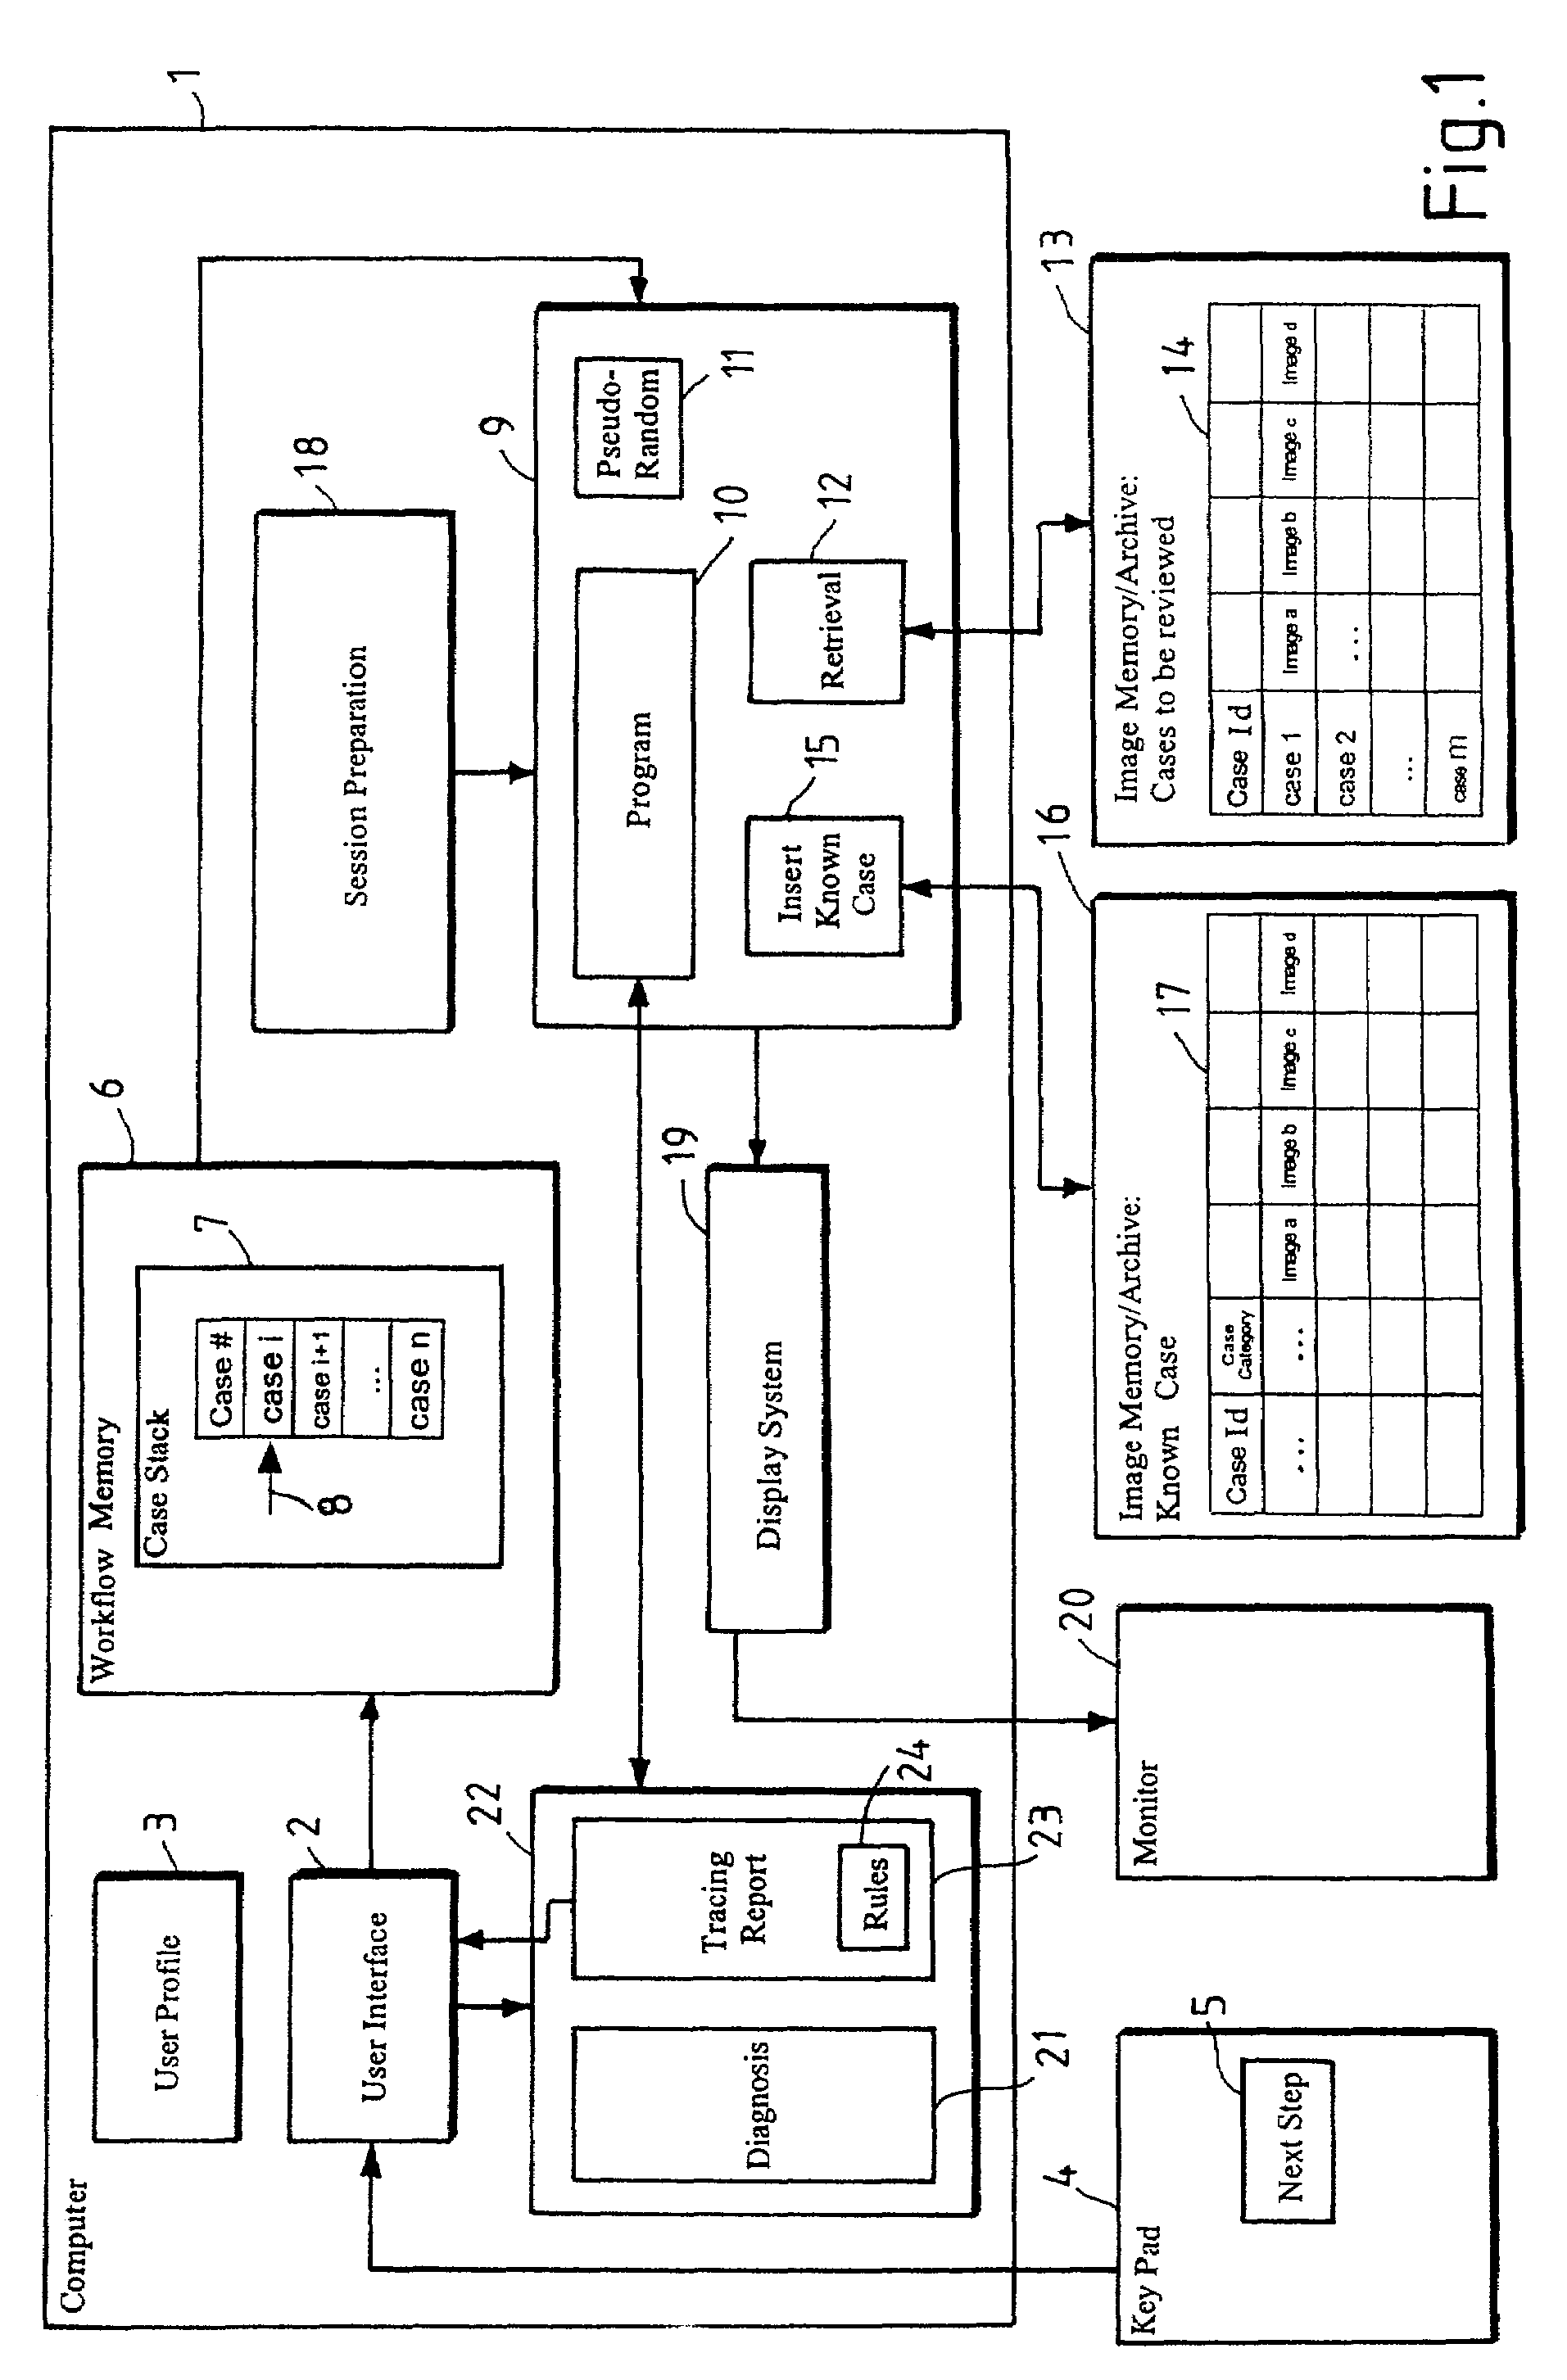 Method and system for in-service monitoring and training for a radiologic workstation